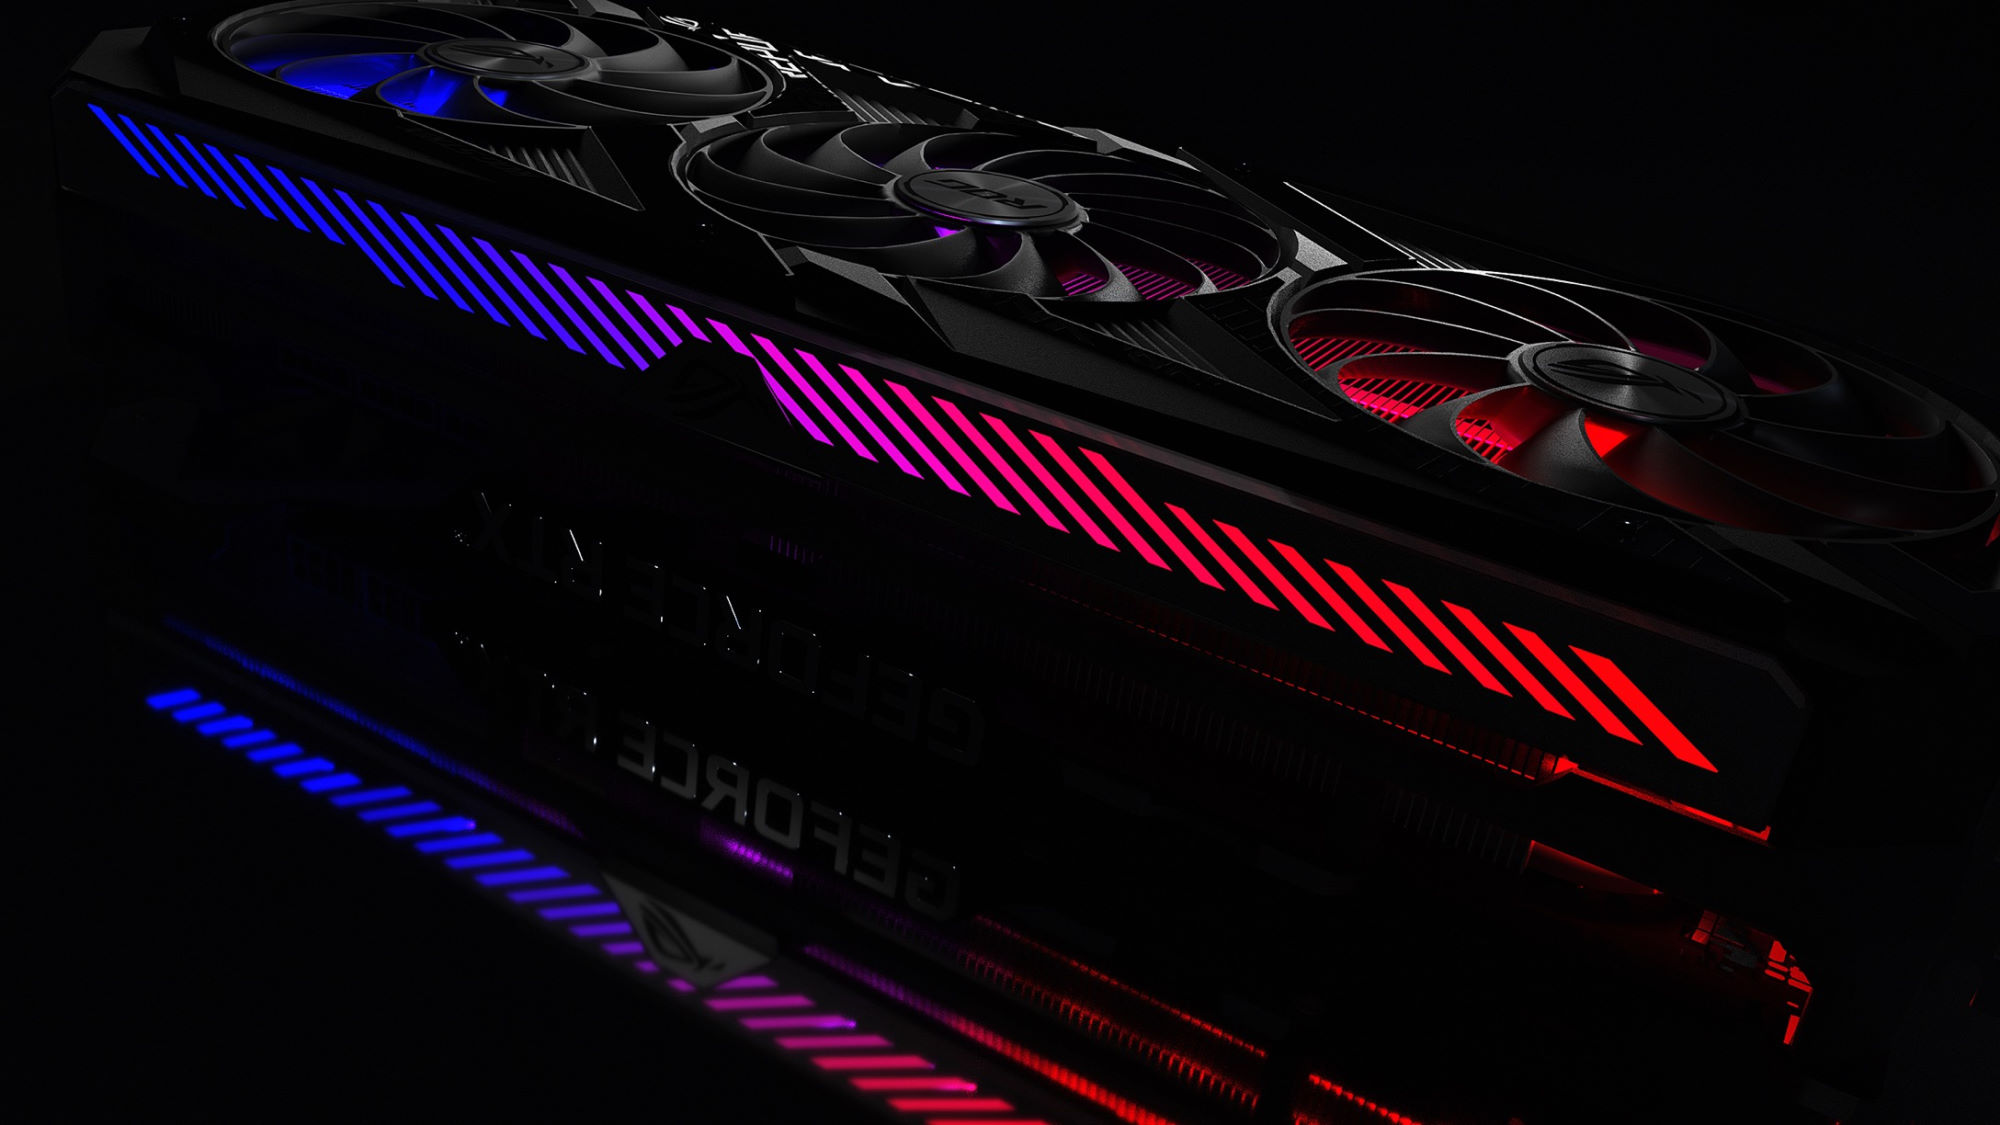 Check Out All Of Our Buffed Up GeForce RTX RTX And RTX 3090 Graphics Cards. ROG Of Gamers Global